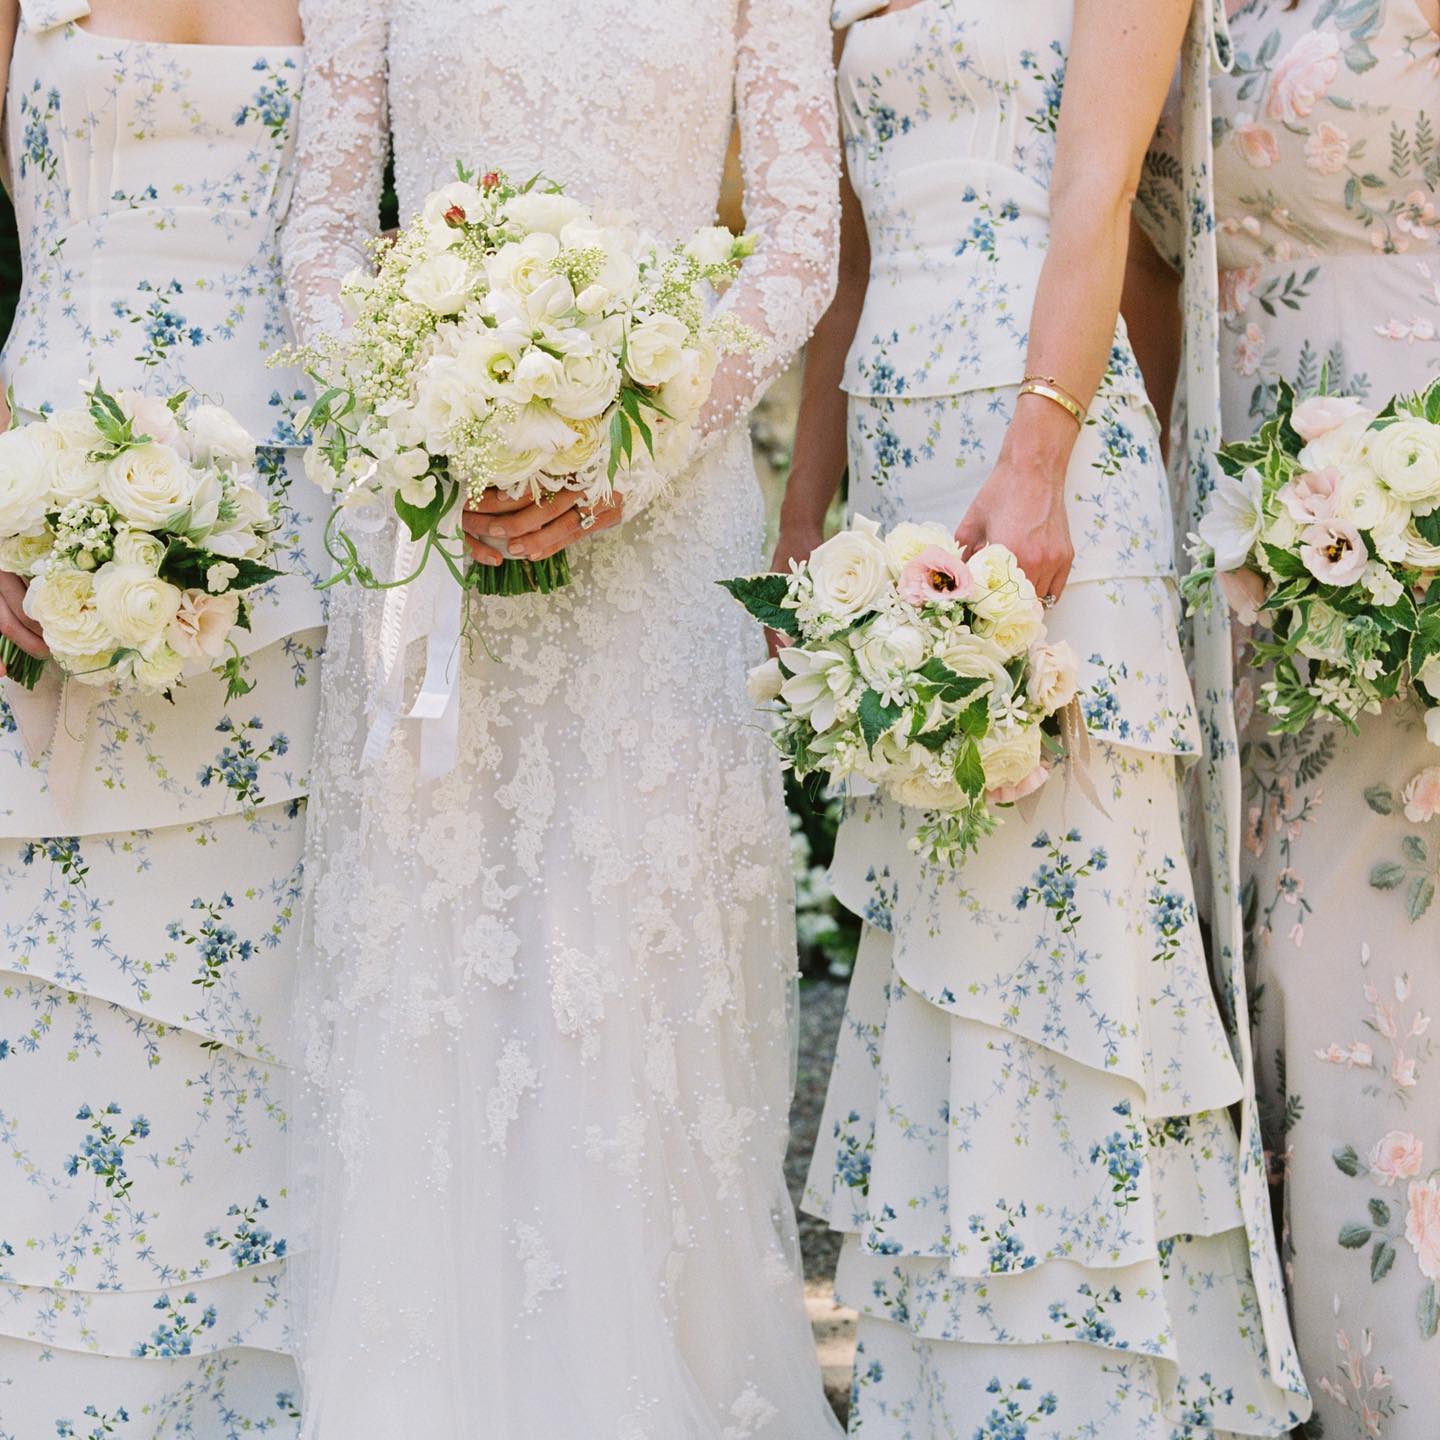 The Most Amazing Bridal Party Attire in 2022